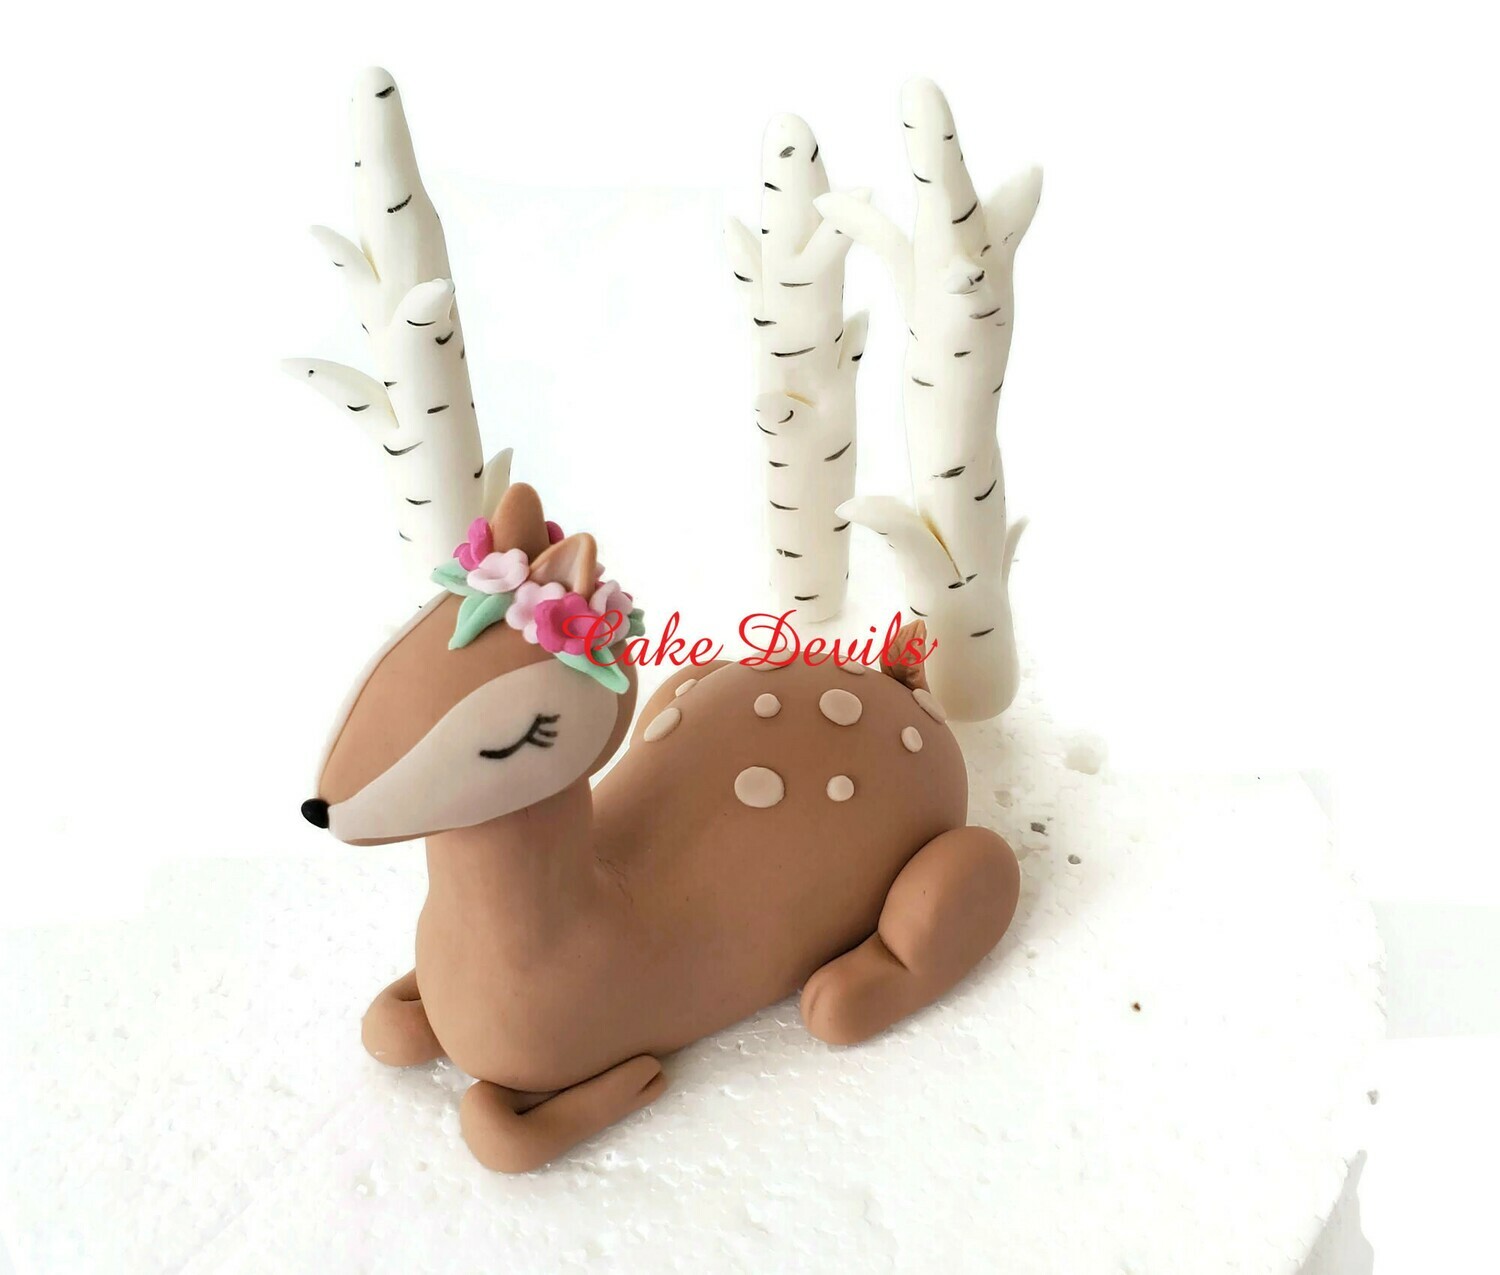 Fondant Deer with optional Flowers and Birch Trees great with the Woodland Animals Fondant Cake Toppers